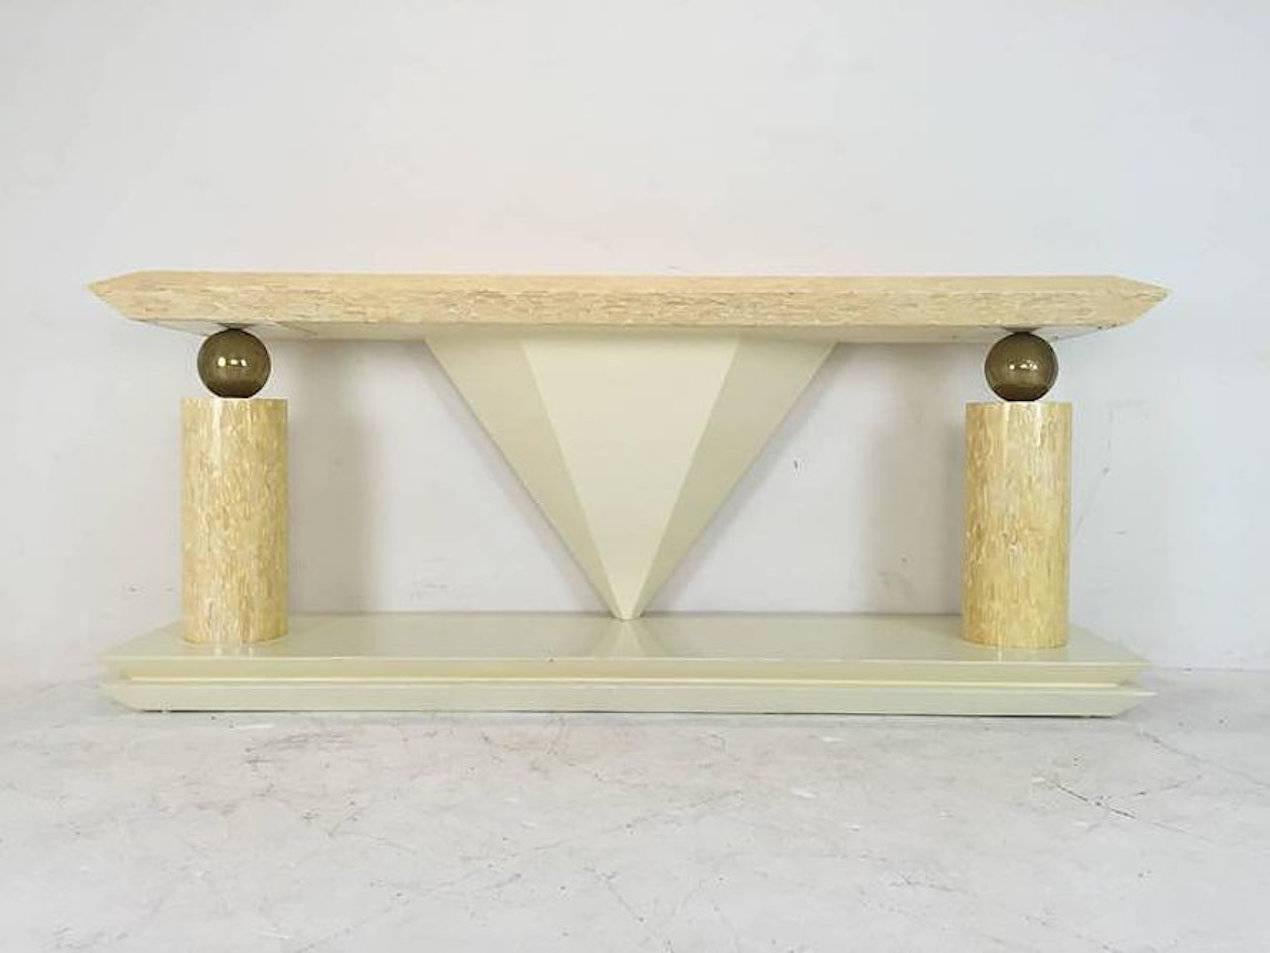 Tessellated Bone/Antler console table. In good vintage conation with wear for use,
circa 1980s

Contact us for more information on console.

Dimensions:72